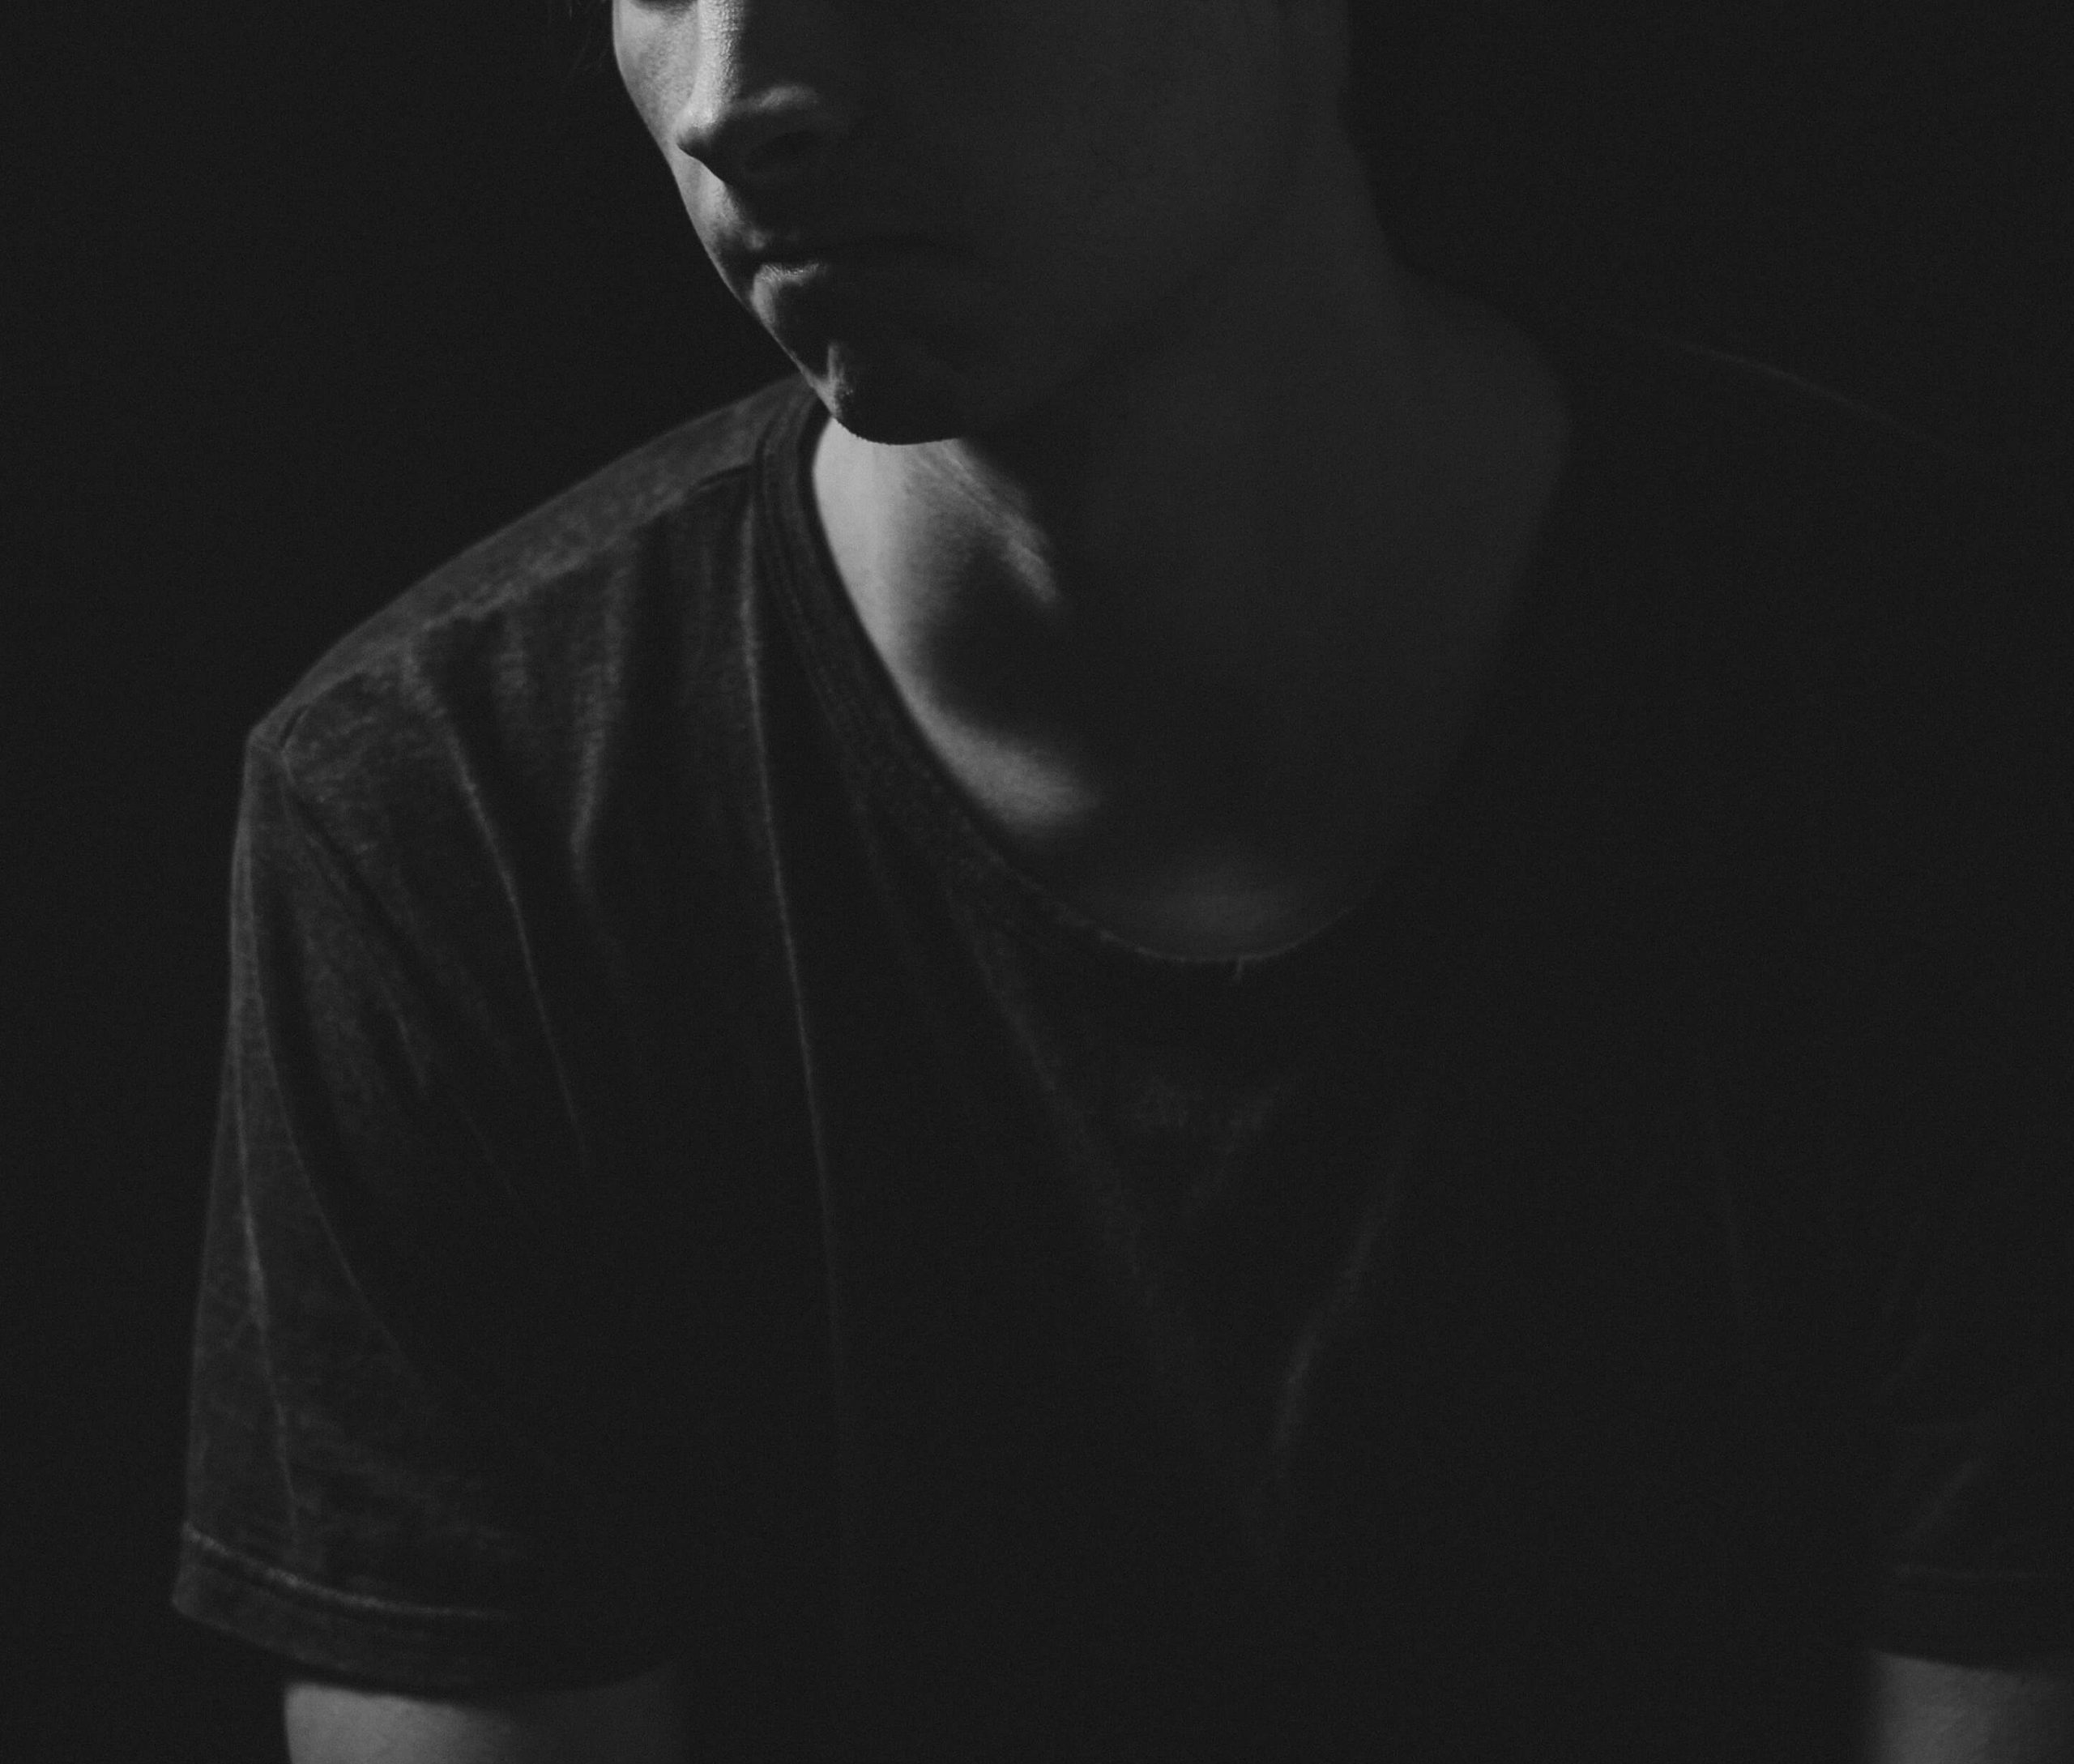 Black and white image of a young man in thought. Work with a skilled depression therapist to help you manage your depression symptoms. Find support in coping with depression counseling in Englewood, CO.